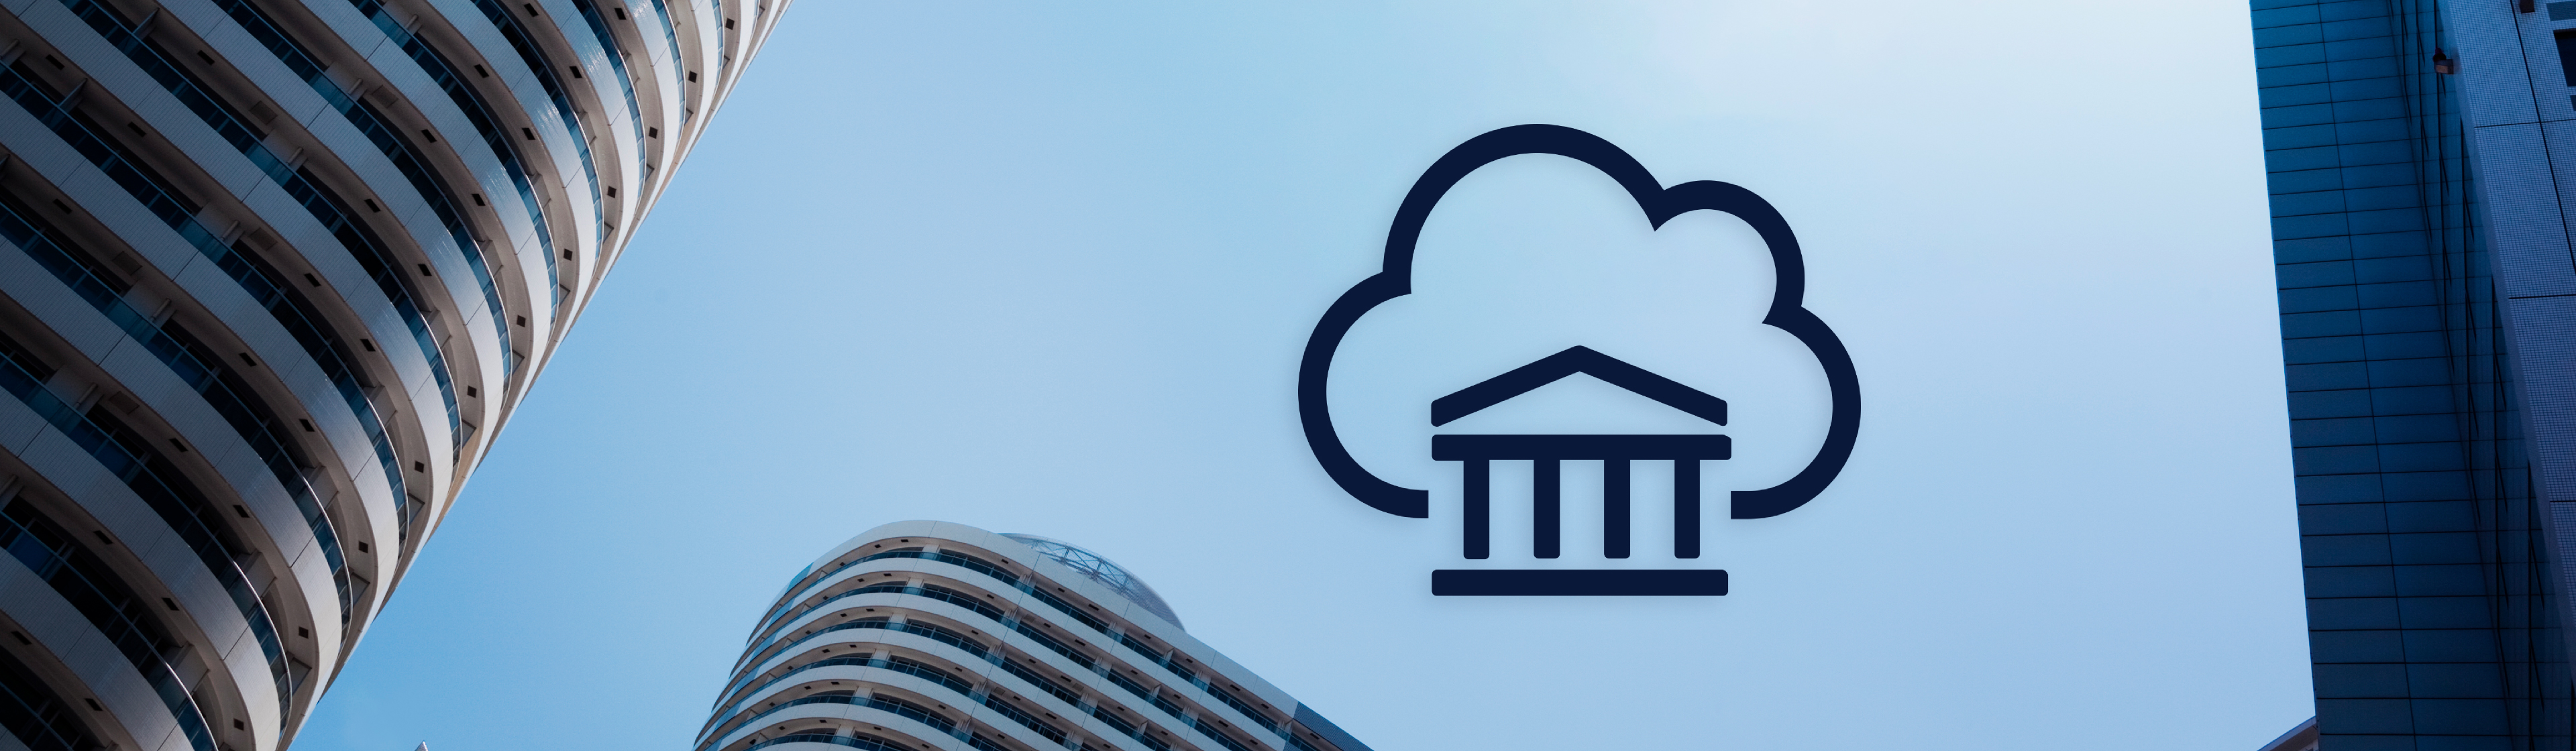 A government building icon surrounded by a cloud amongst high-rise buildings